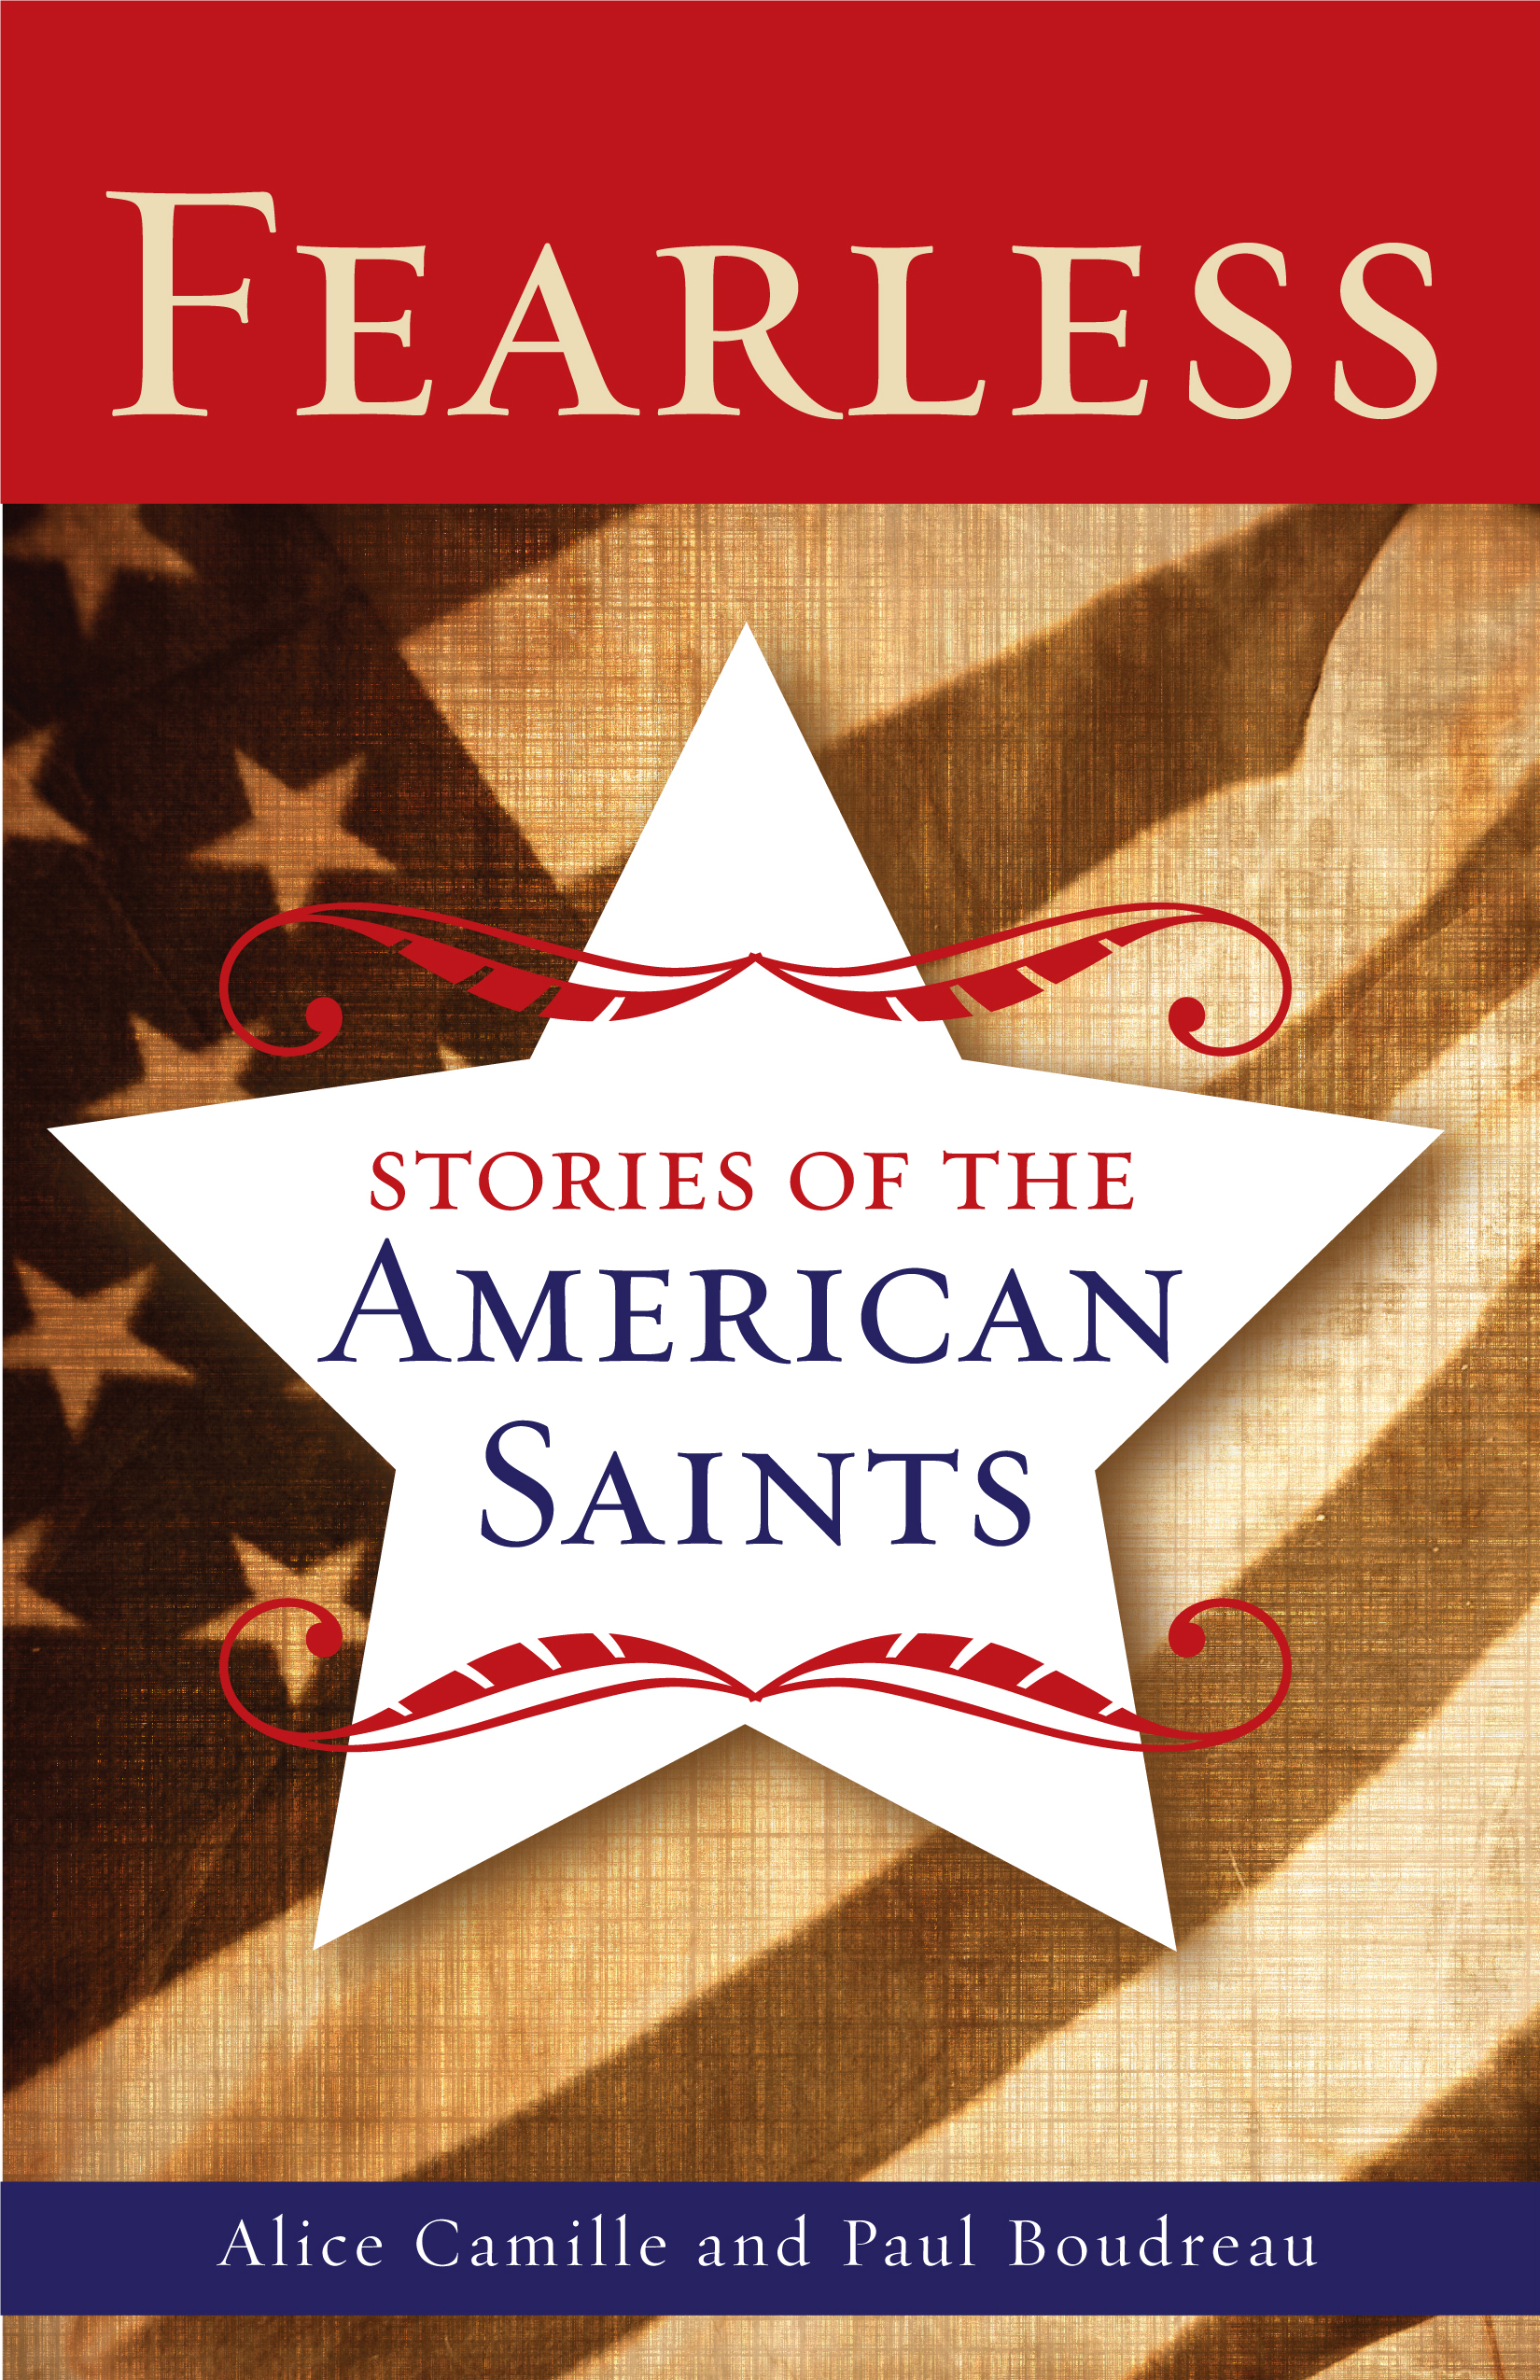 Fearless Stories of the American Saints / Alice Camille and Paul Boudreau